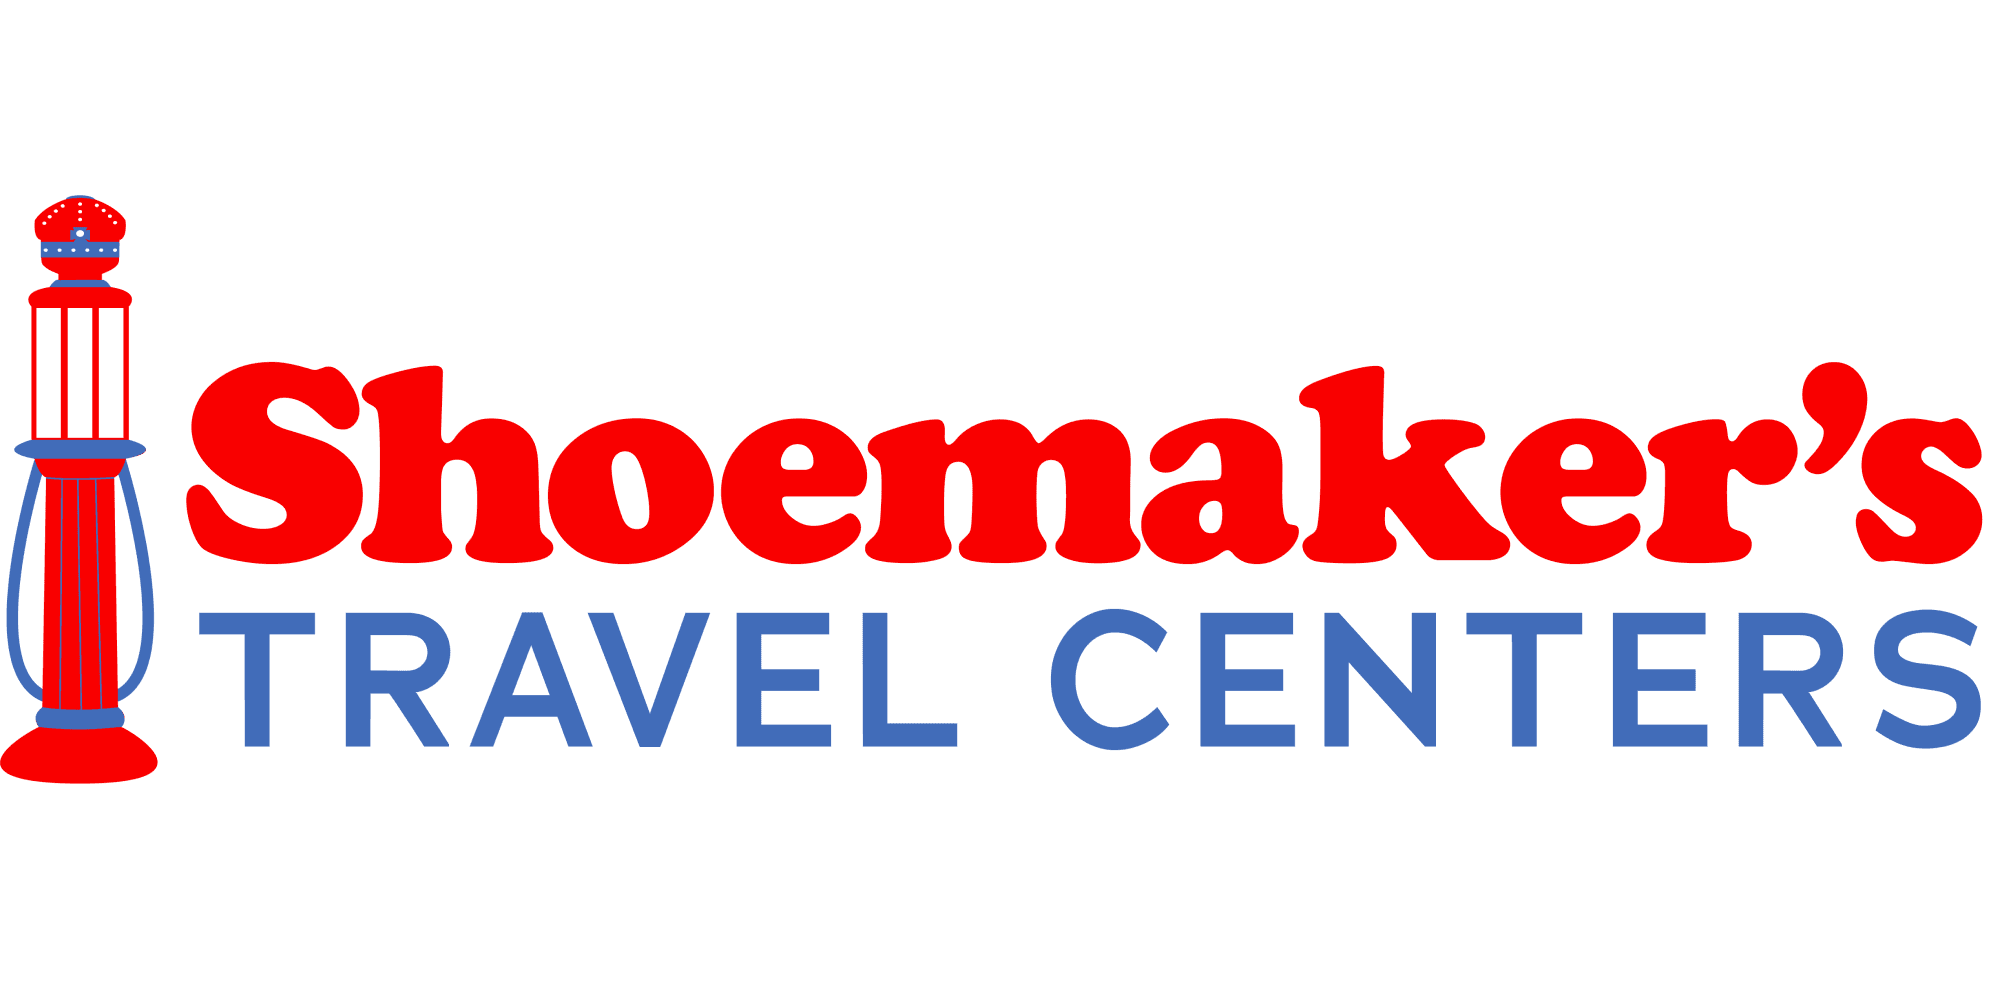 Shoemakers Travel Centers